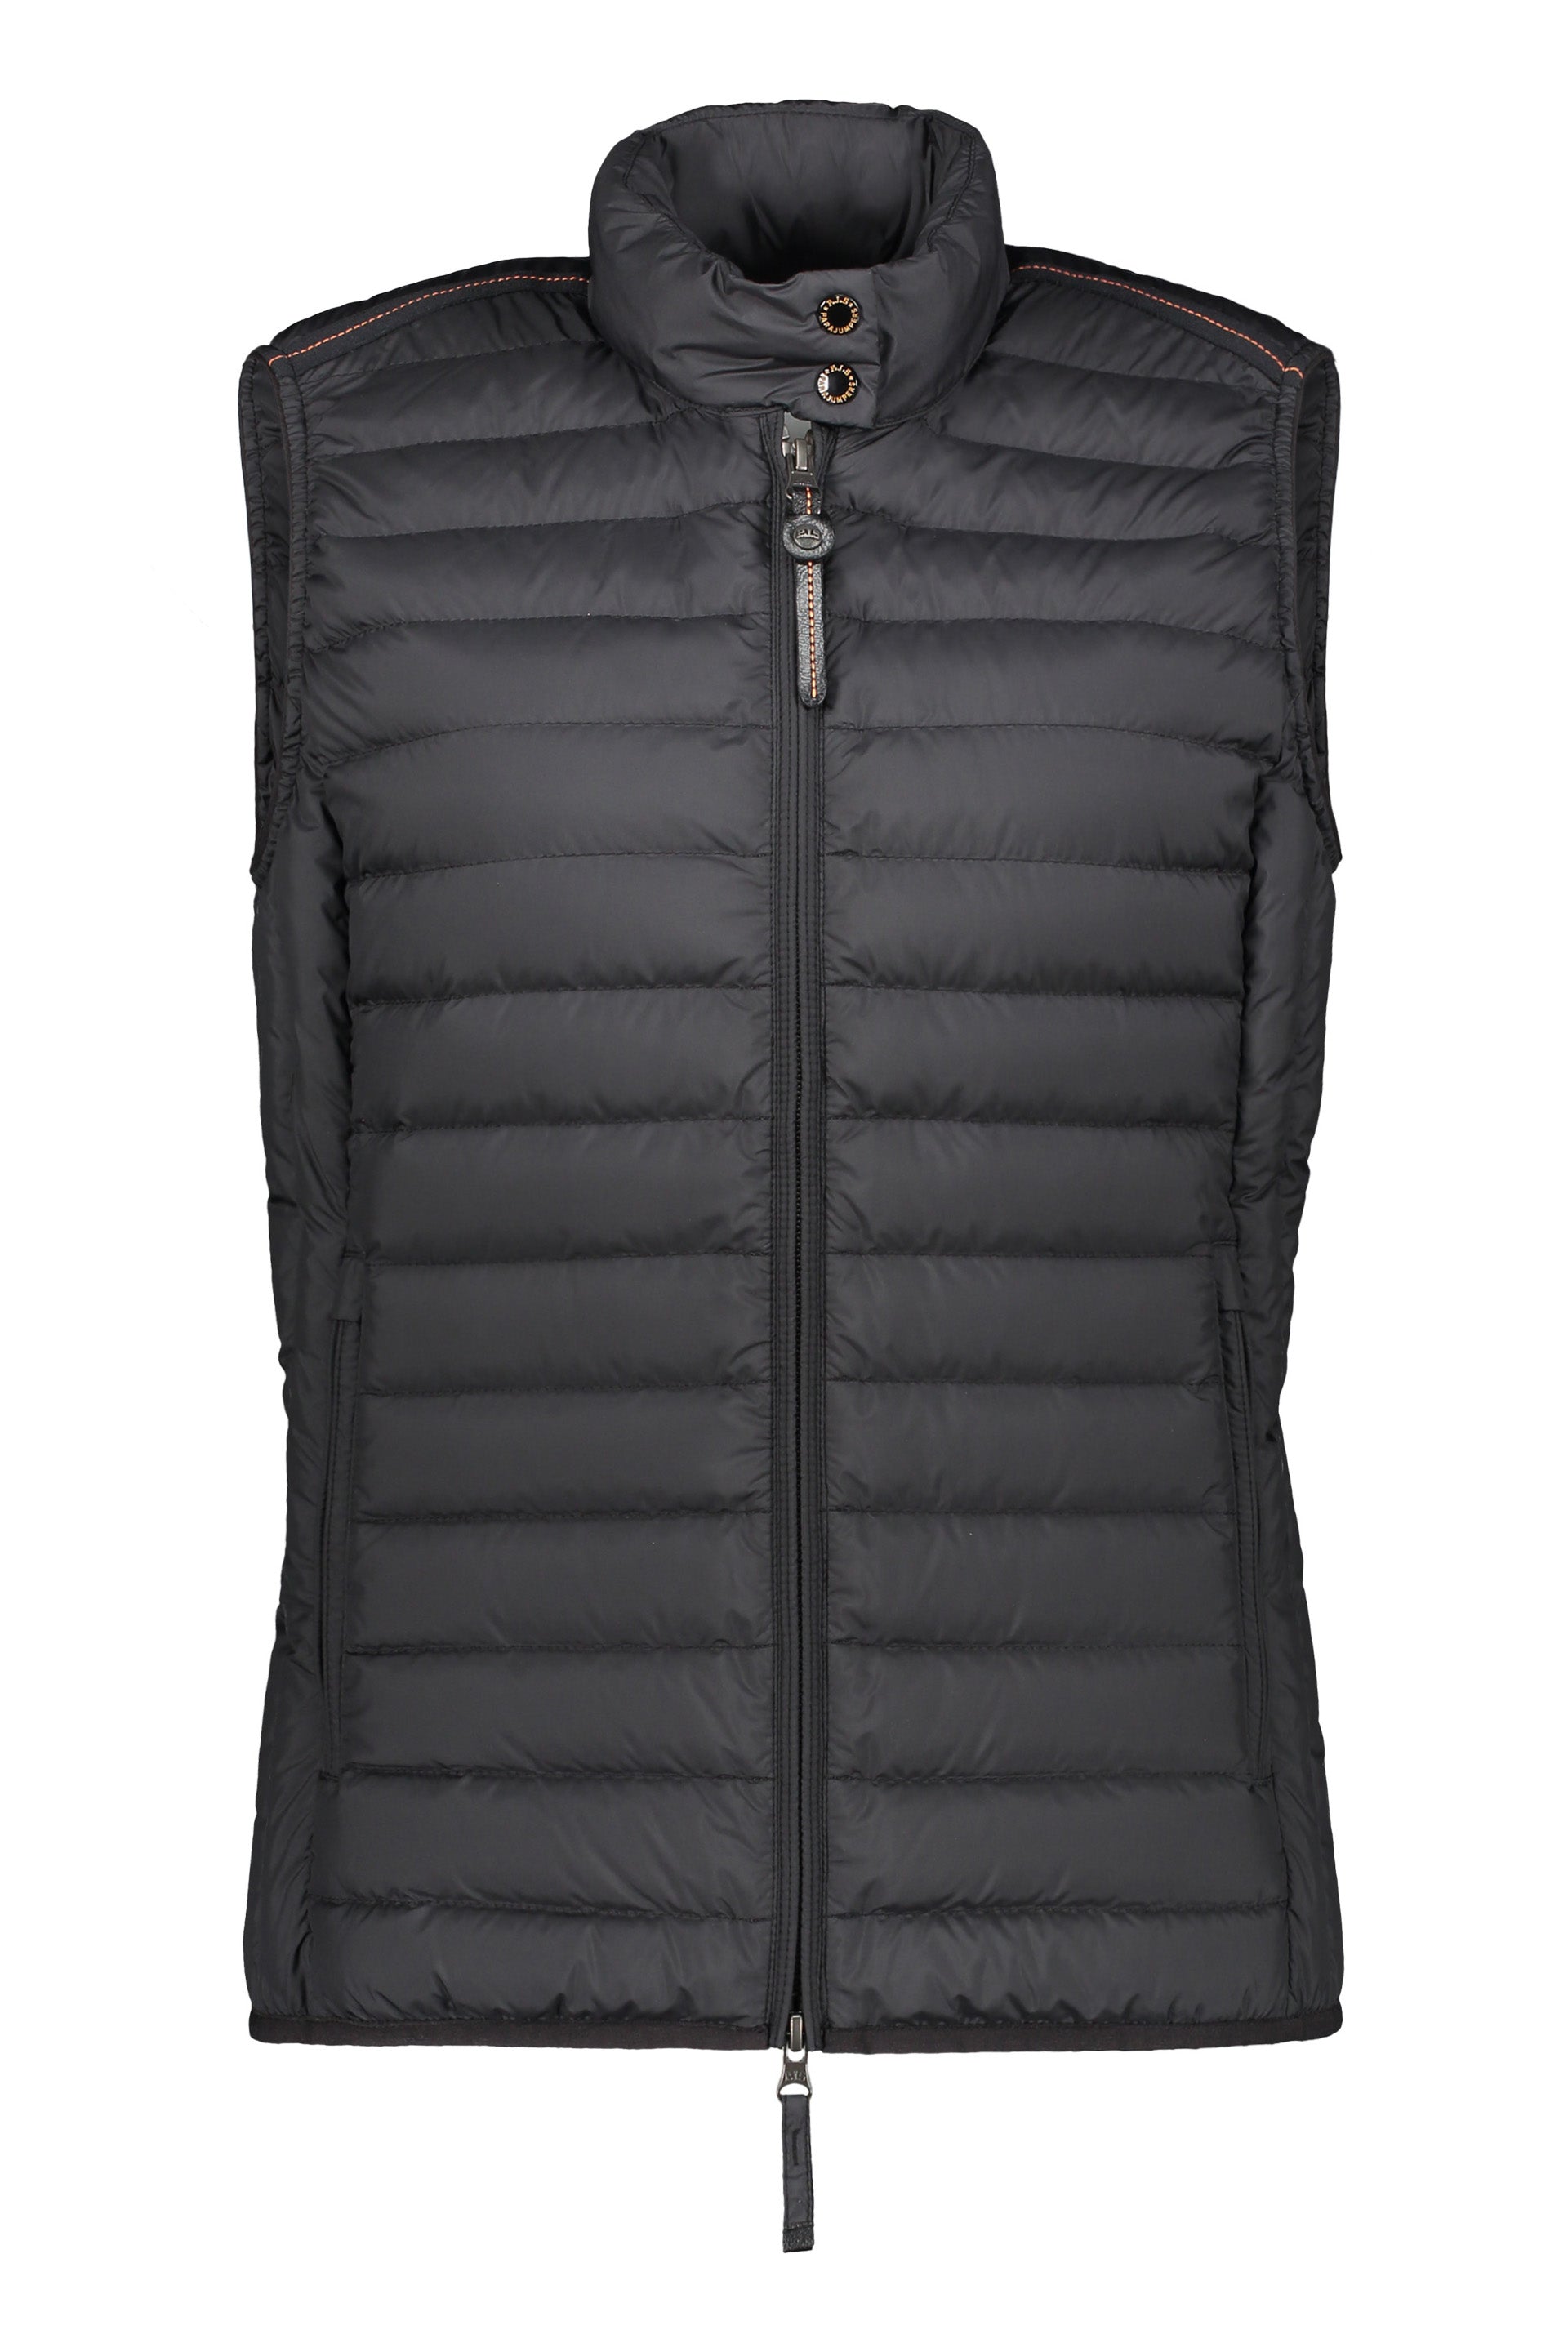 Parajumpers-OUTLET-SALE-Dodie-padded-bodywarmer-Jacken-Mantel-L-ARCHIVE-COLLECTION.jpg